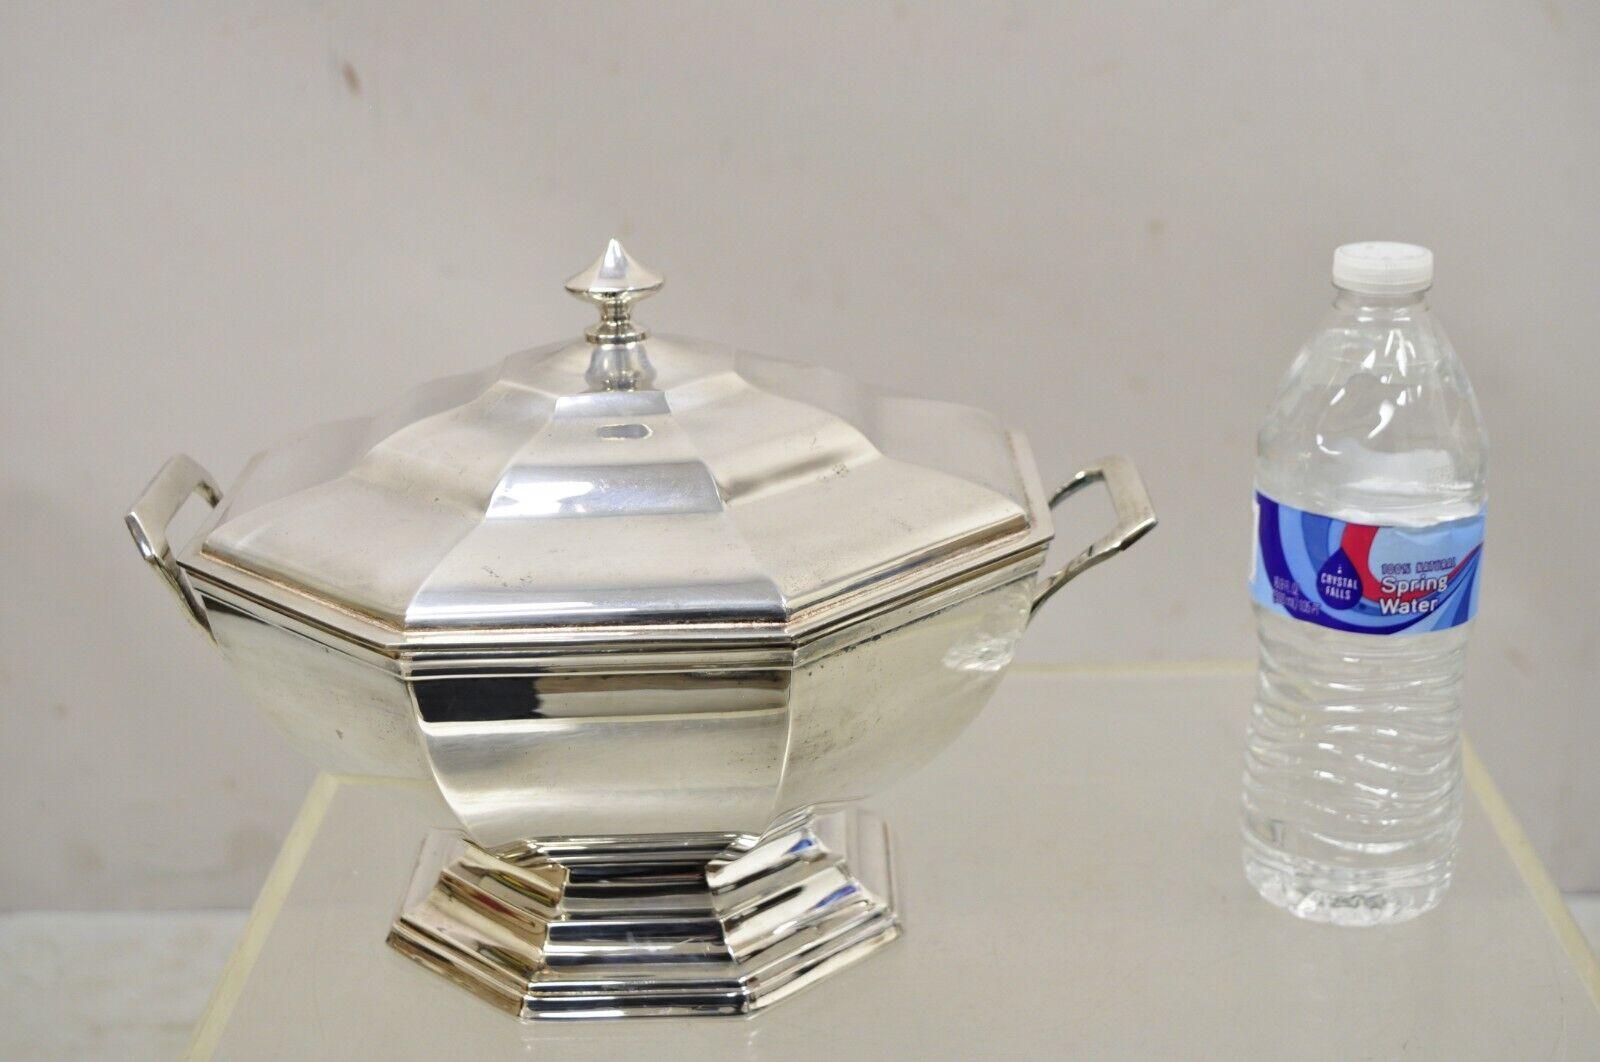 Soppil Wolff Silver Plate Covered Soup Tureen Casserole Lidded Dish Serving Dish 5